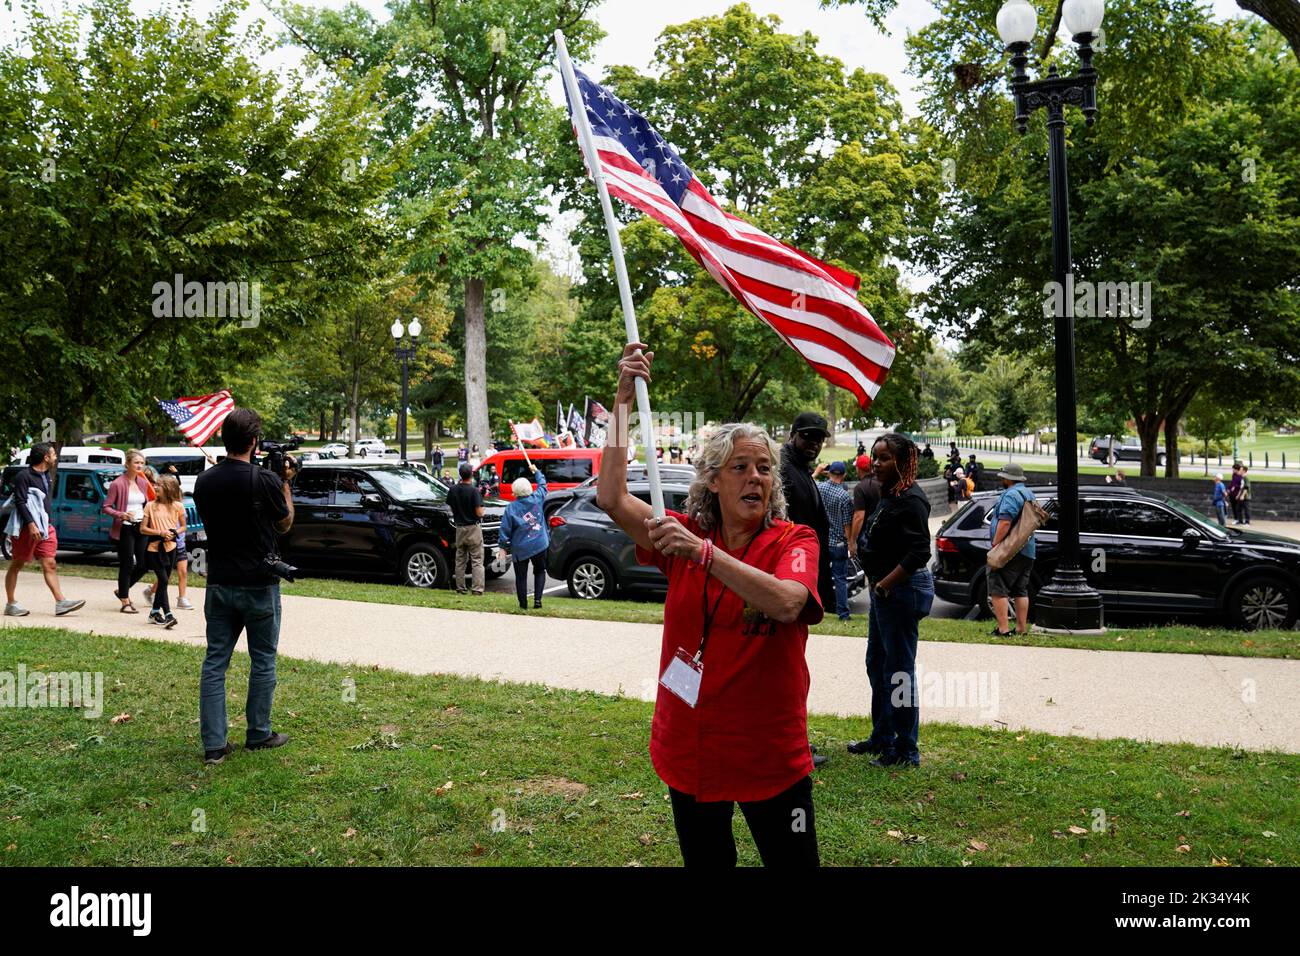 Micki Witthoeft, the mother of Ashli Babbitt who was shot and killed during the January 6th attack on the U.S. Capitol, waves a flag as counter protesters gather across the street during an event supporting the people charged with crimes related to the January 6th, 2021 attack on the U.S. Capitol, in Washington, U.S., September 24, 2022. REUTERS/Elizabeth Frantz Stock Photo